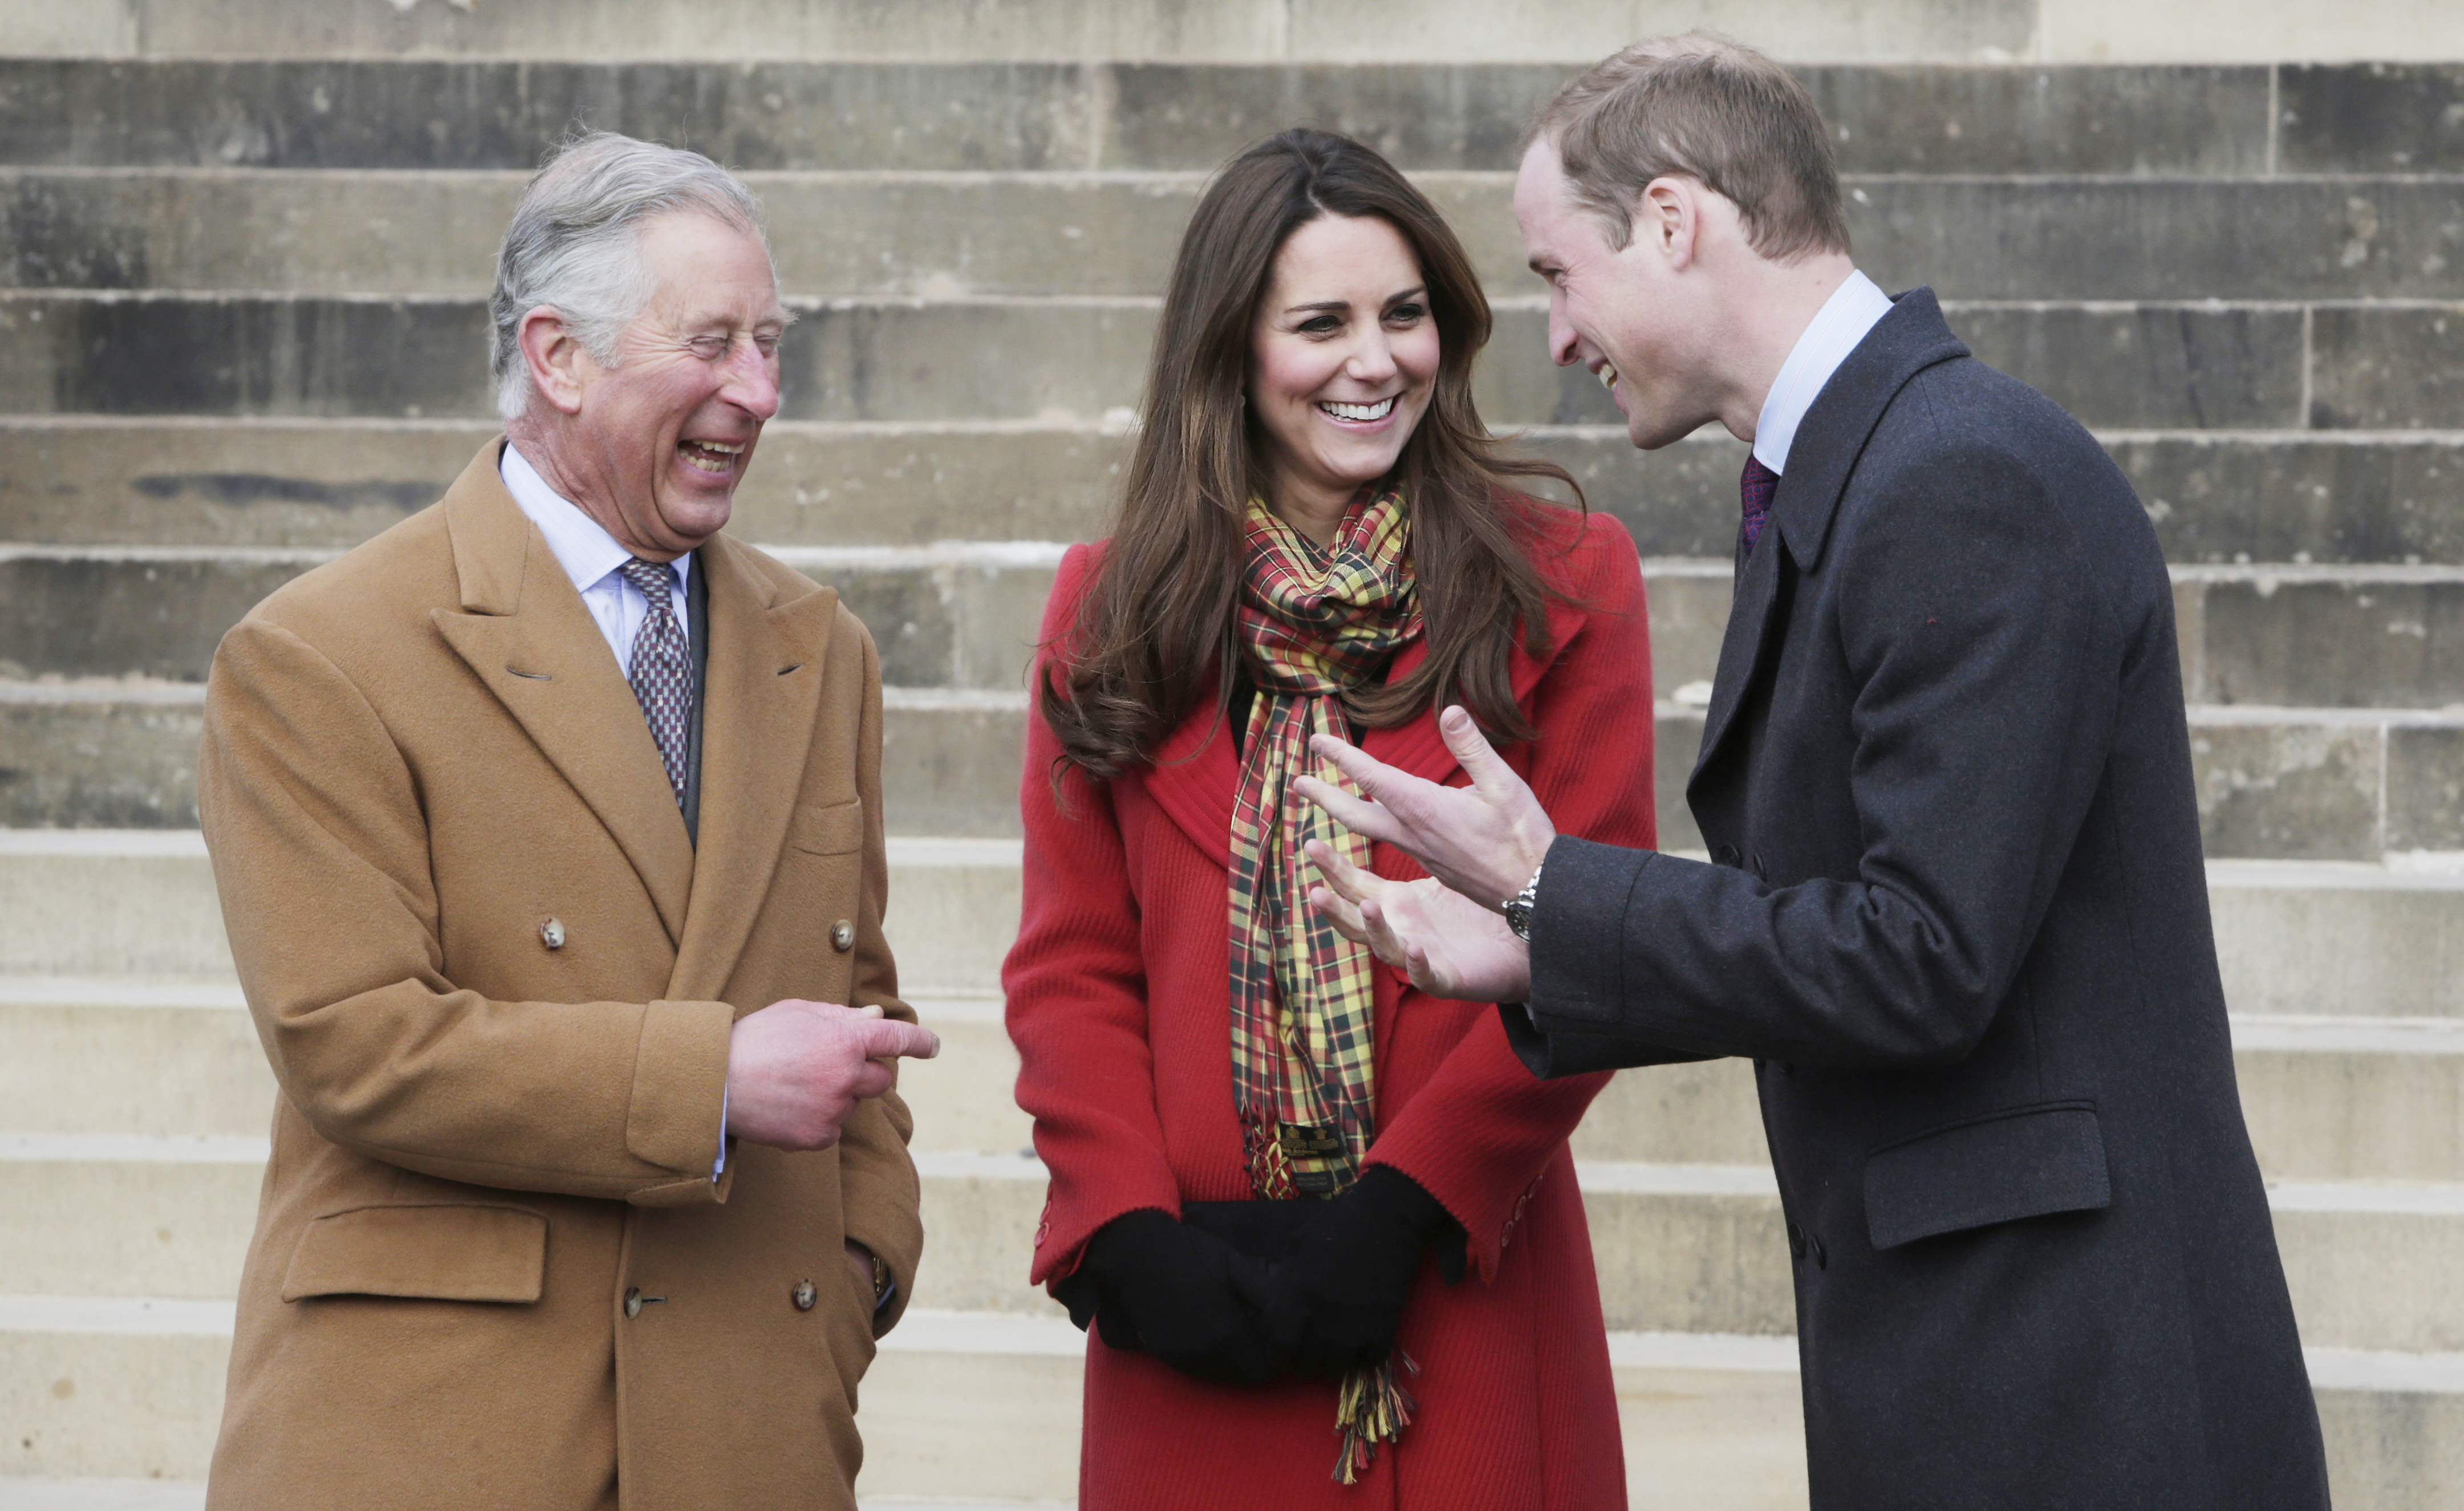 King Charles III, Prince William and the Princess of Wales, Kate in Scotland in 2013 | Source: Getty Images